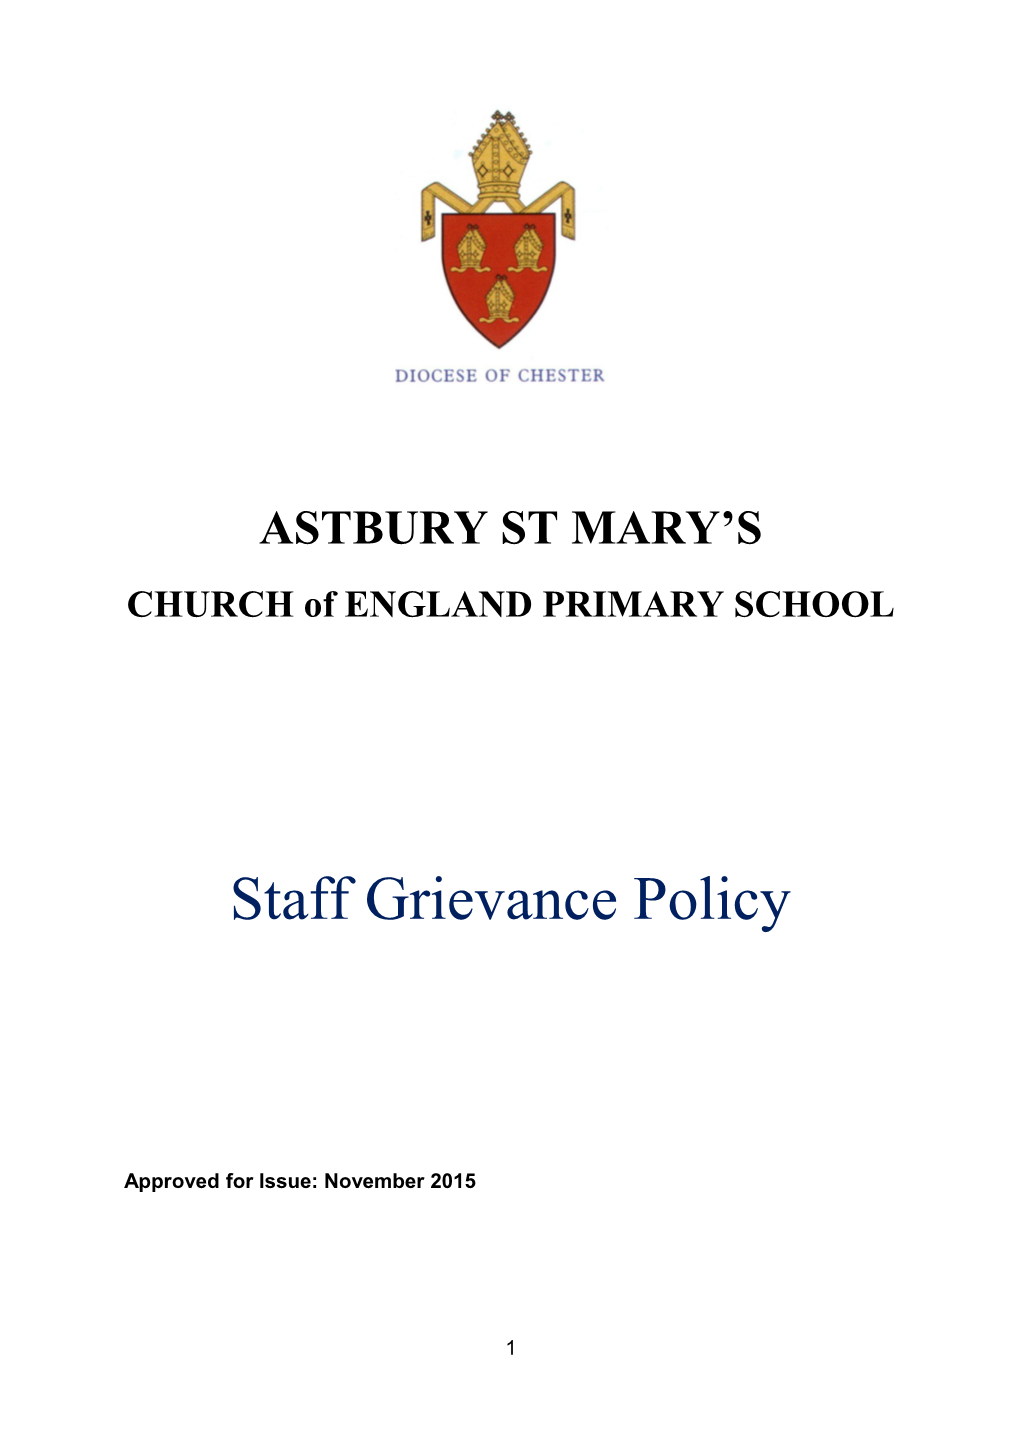 Model Grievance Policy for All School/Academy Staff (Education HR Policy)